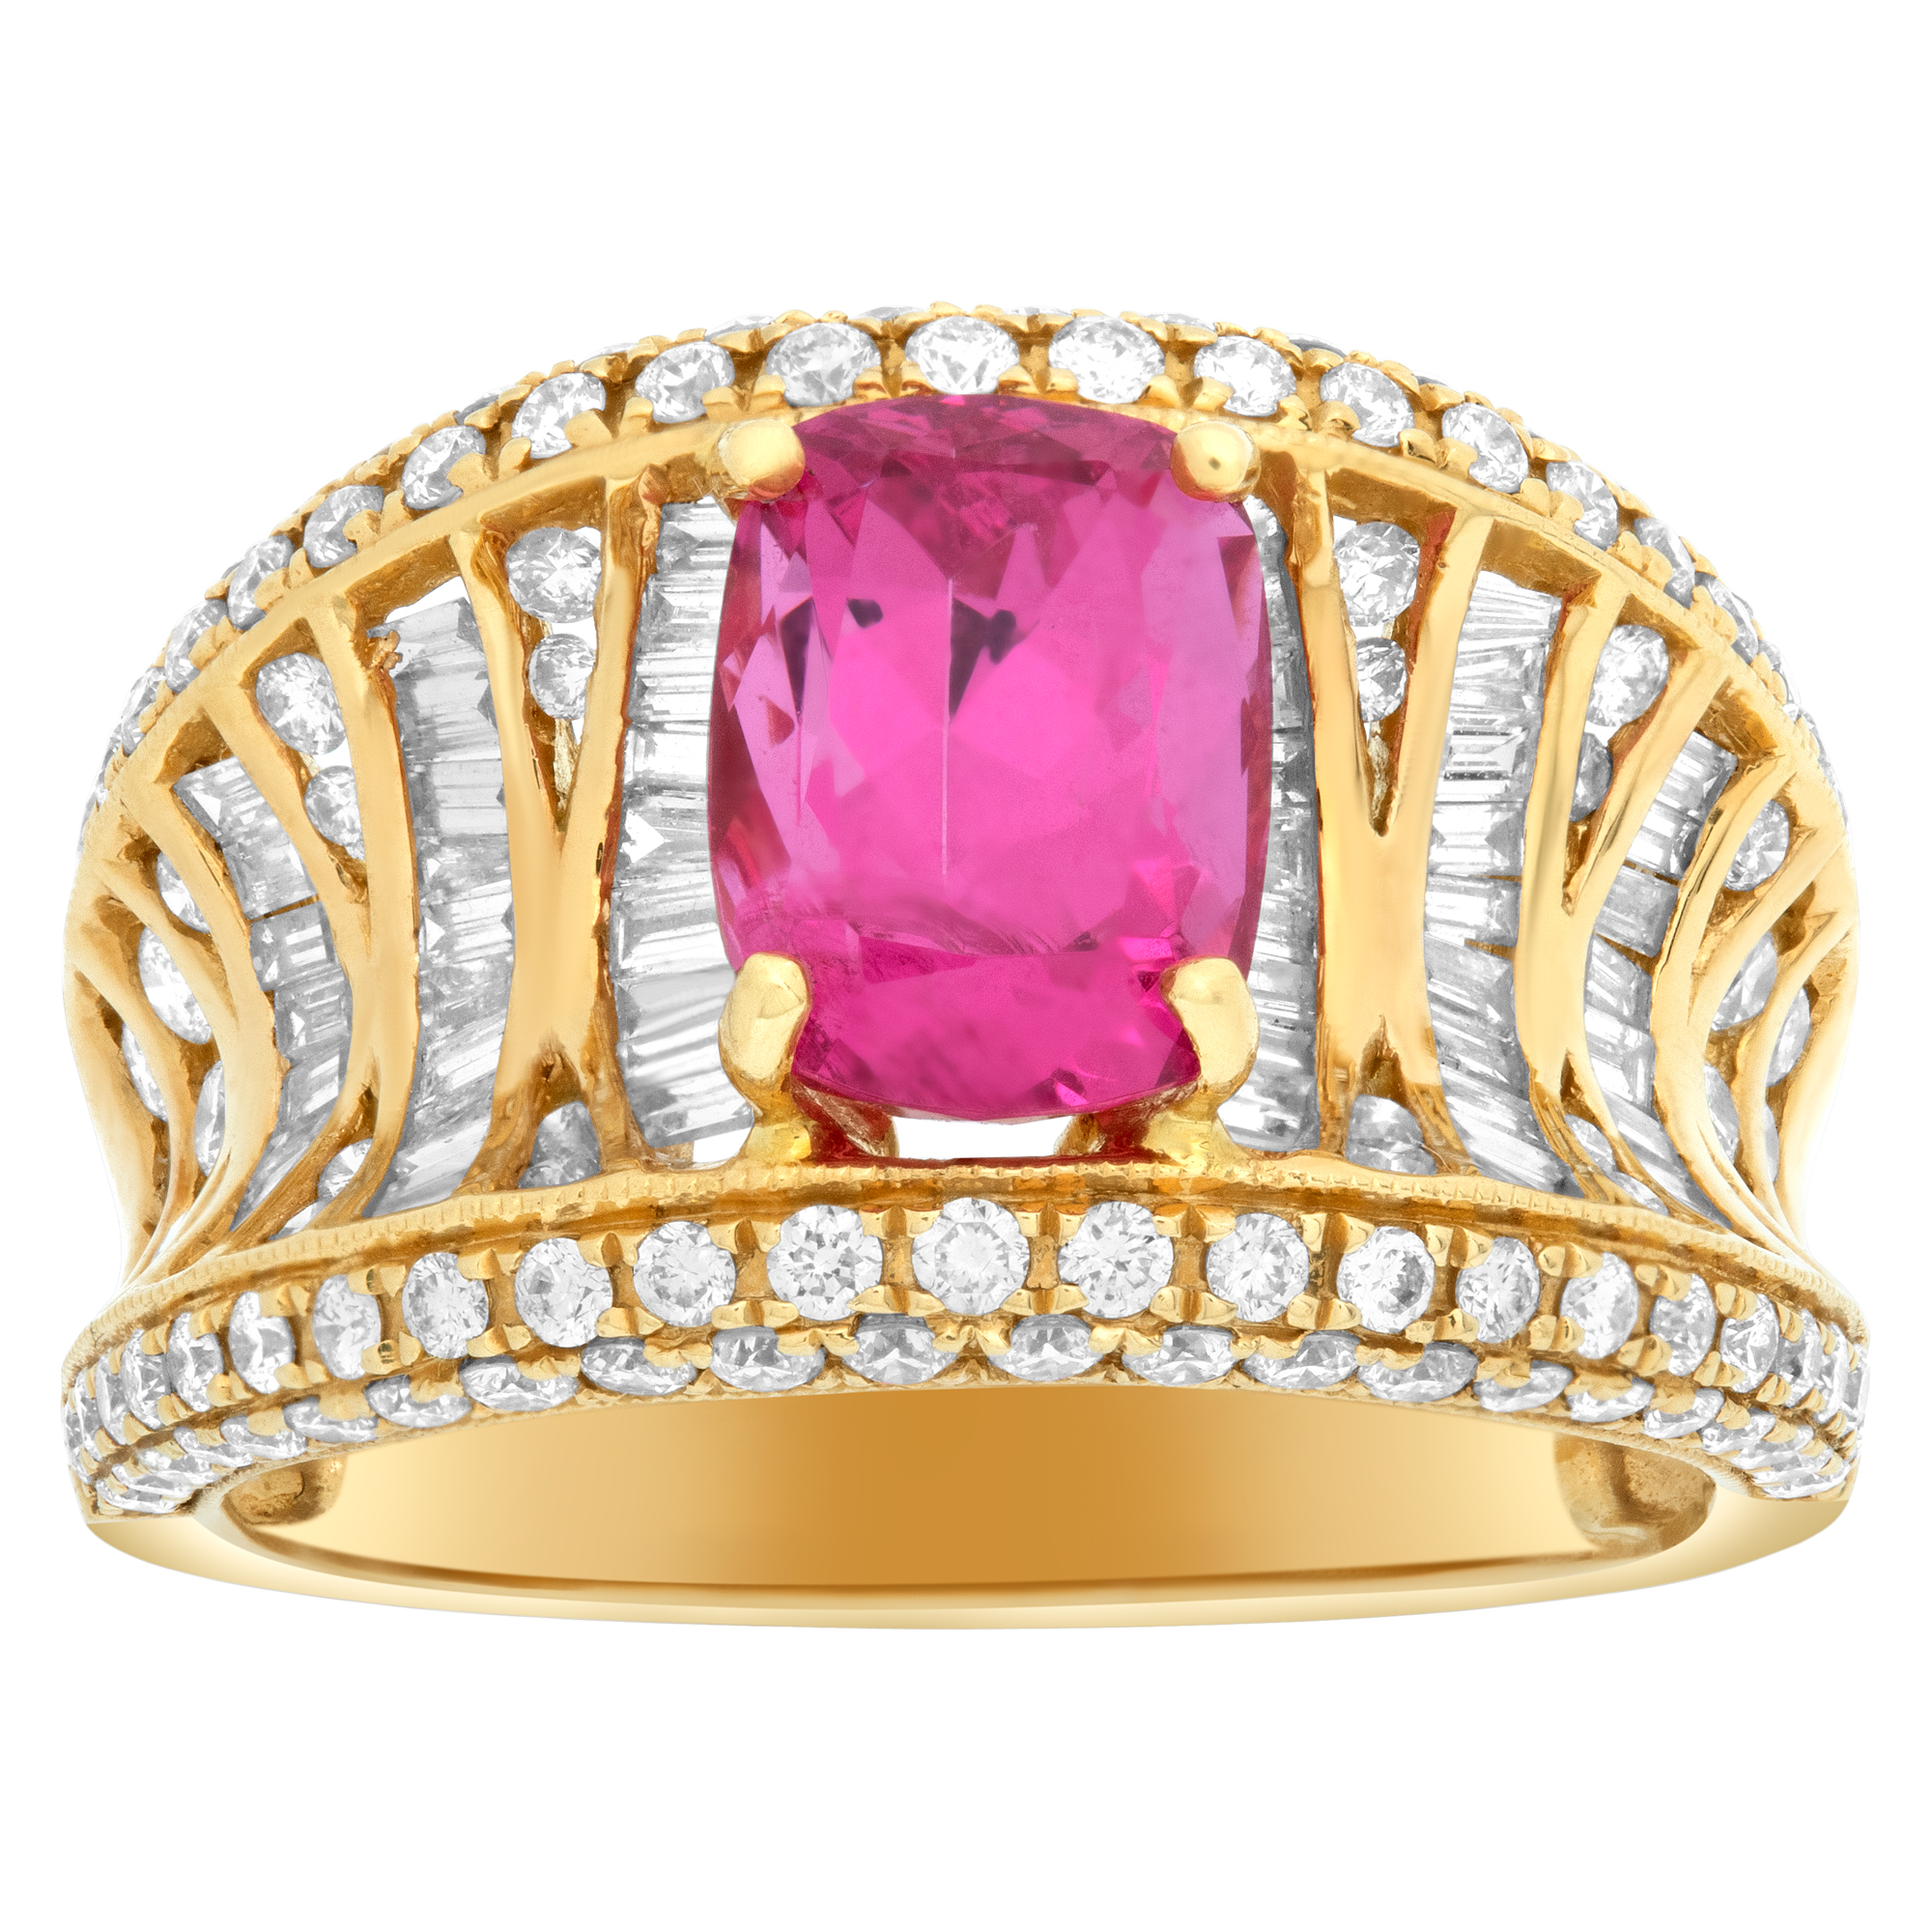 Oval brilliant cut pink spinel (2.73 carats) & diamonds ring set in 18k yellow gold